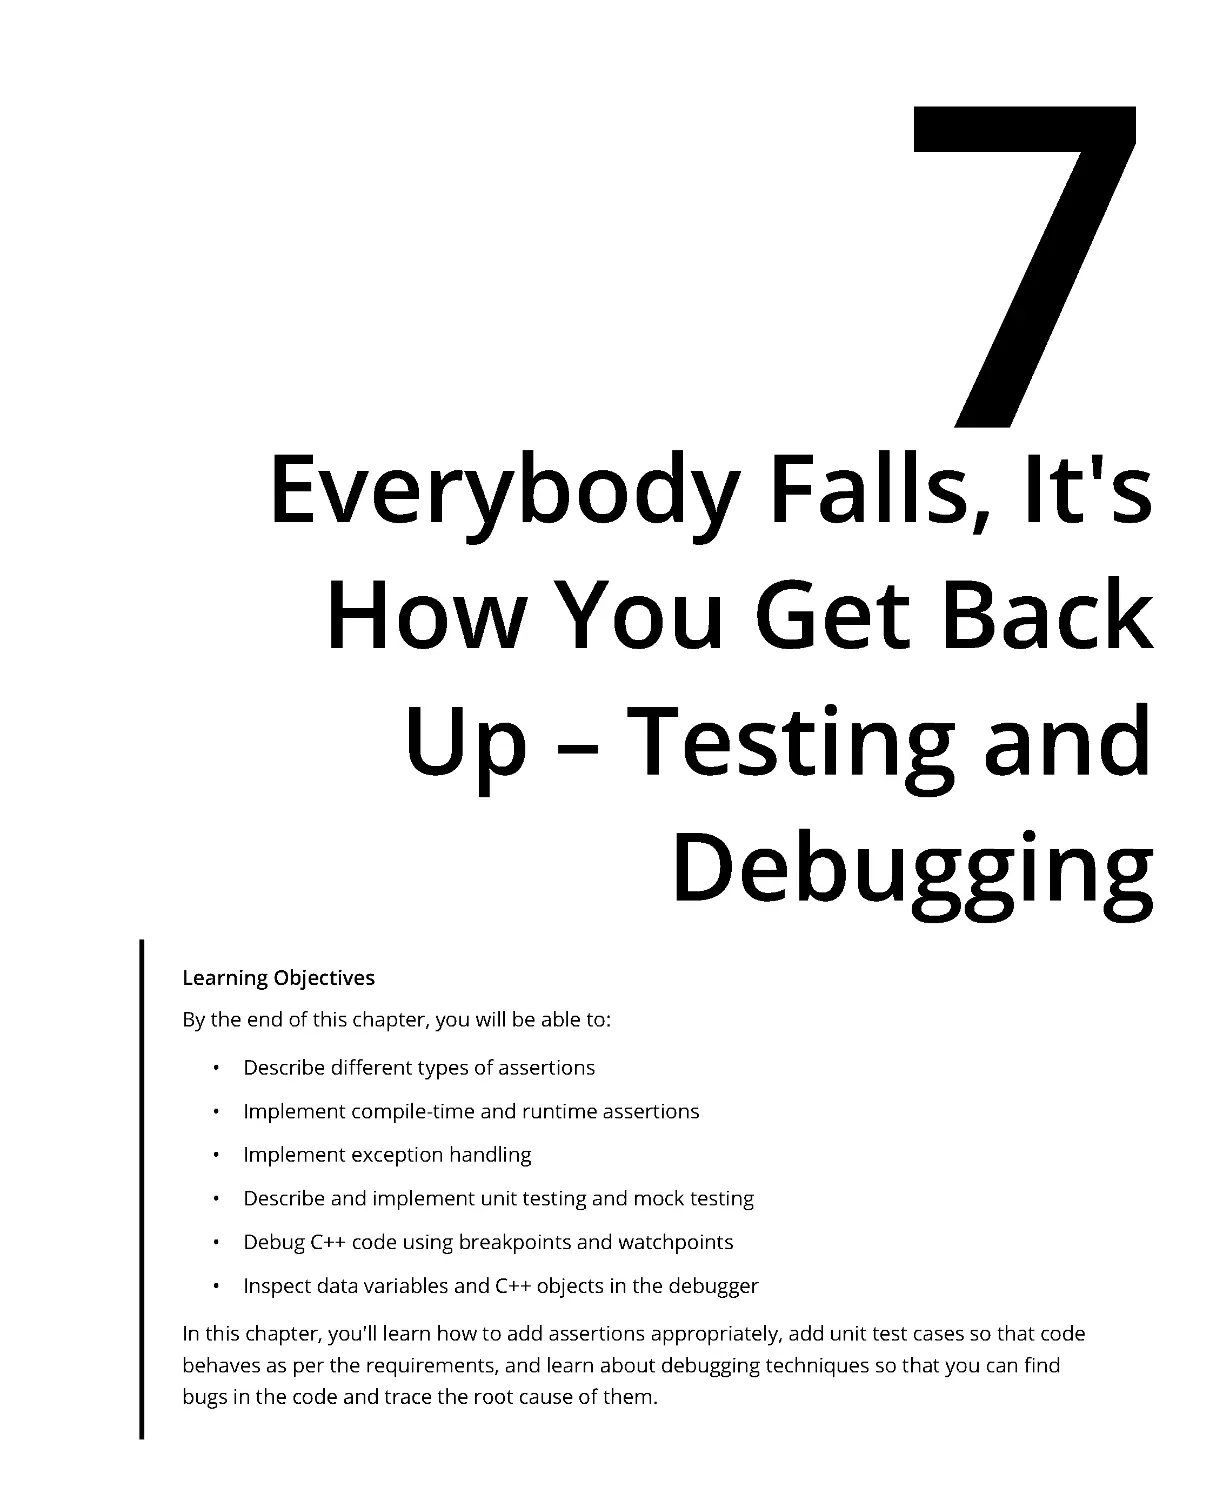 Chapter 7: Everybody Falls, It's How You Get Back Up – Testing and Debugging